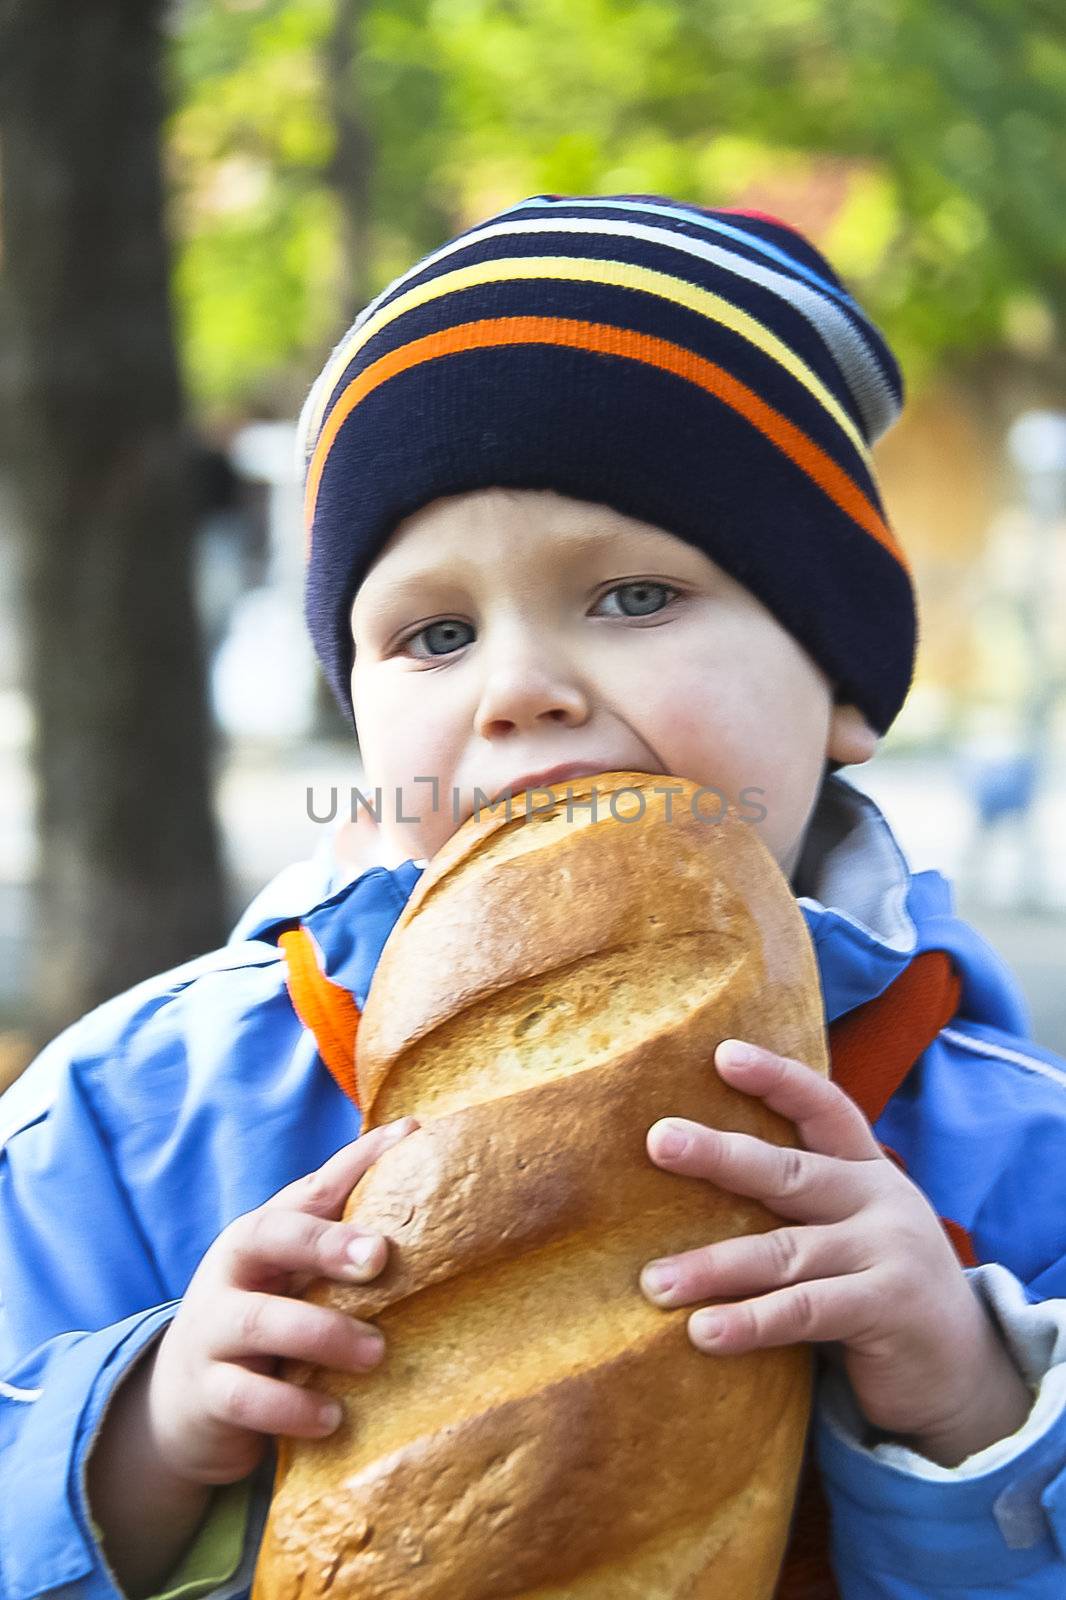 The kid eats bread during autumn walk in the park by NickNick